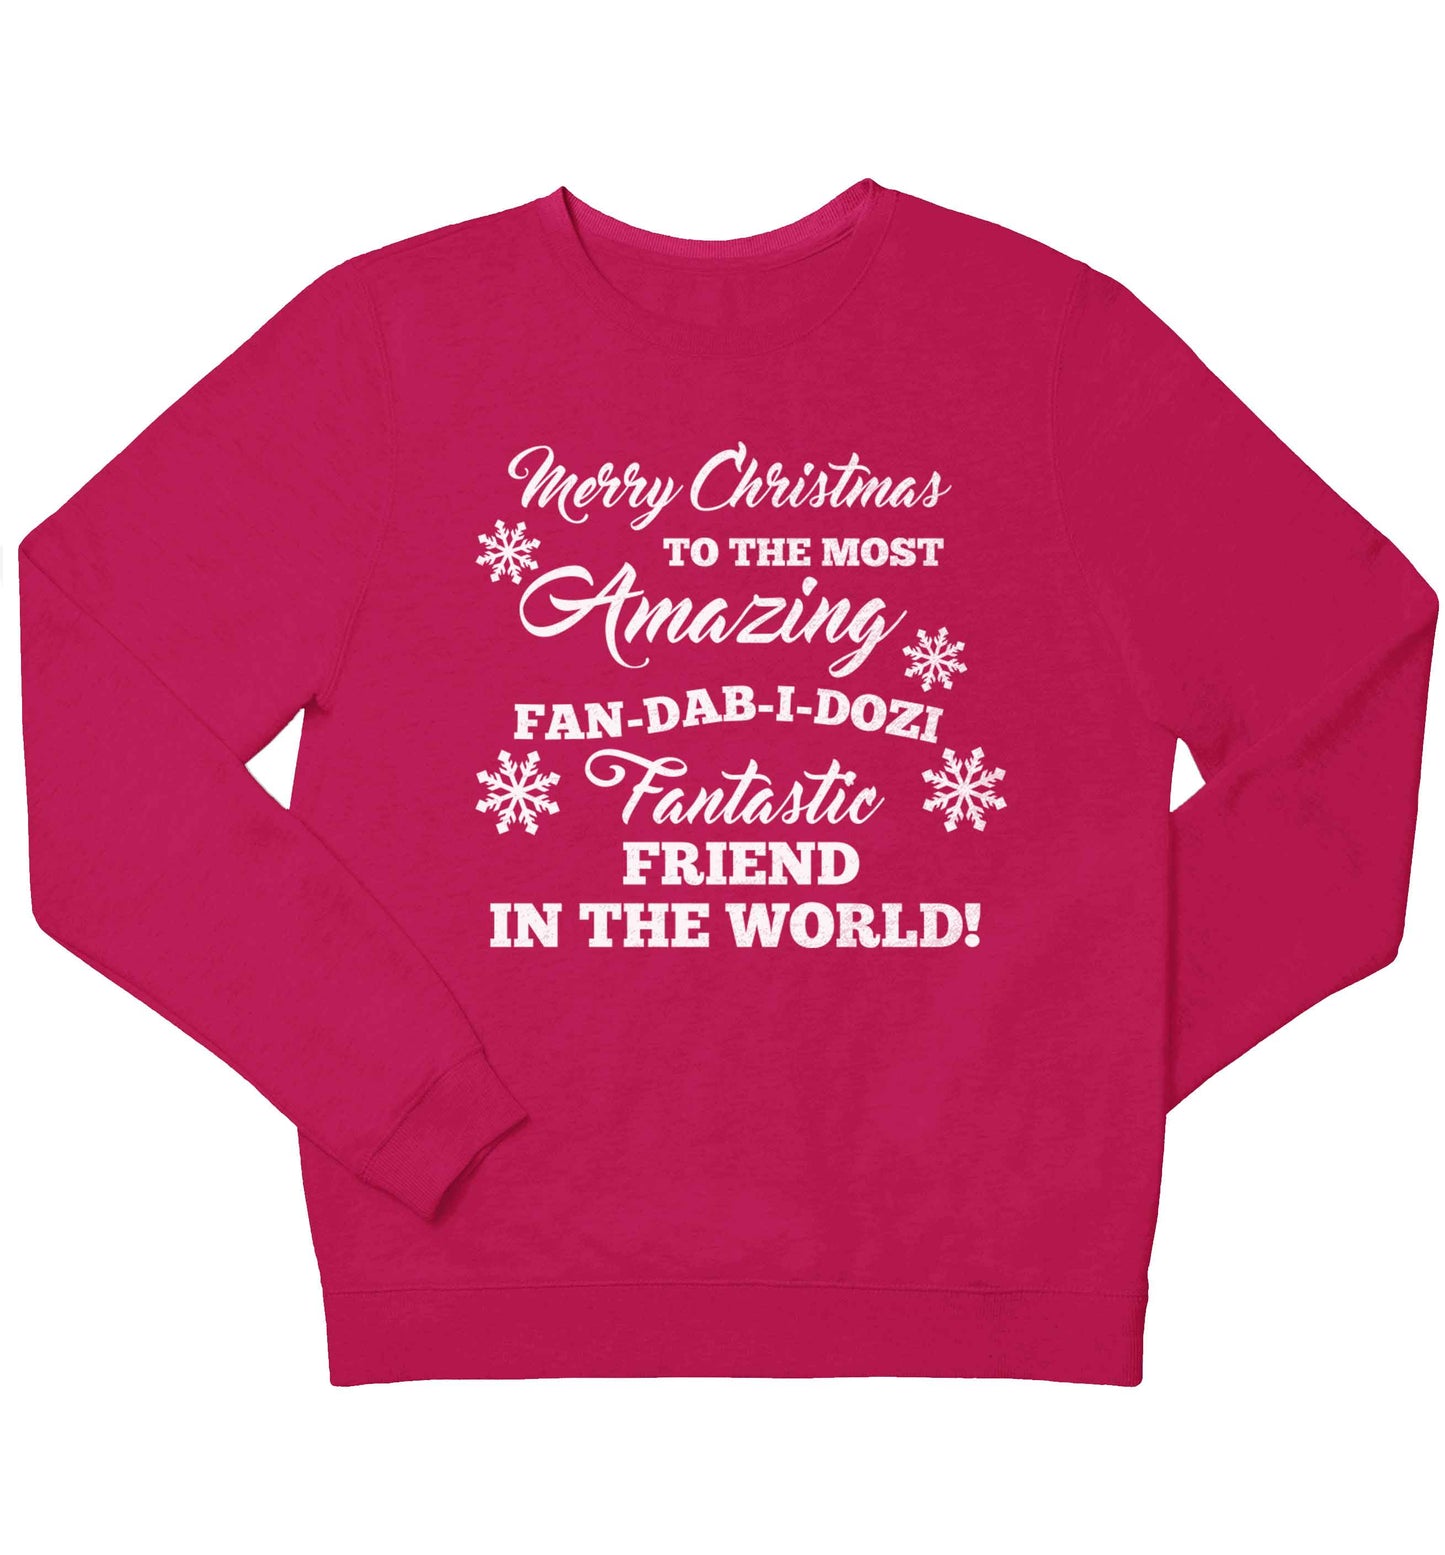 Merry Christmas to the most amazing fan-dab-i-dozi fantasic friend in the world children's pink sweater 12-13 Years